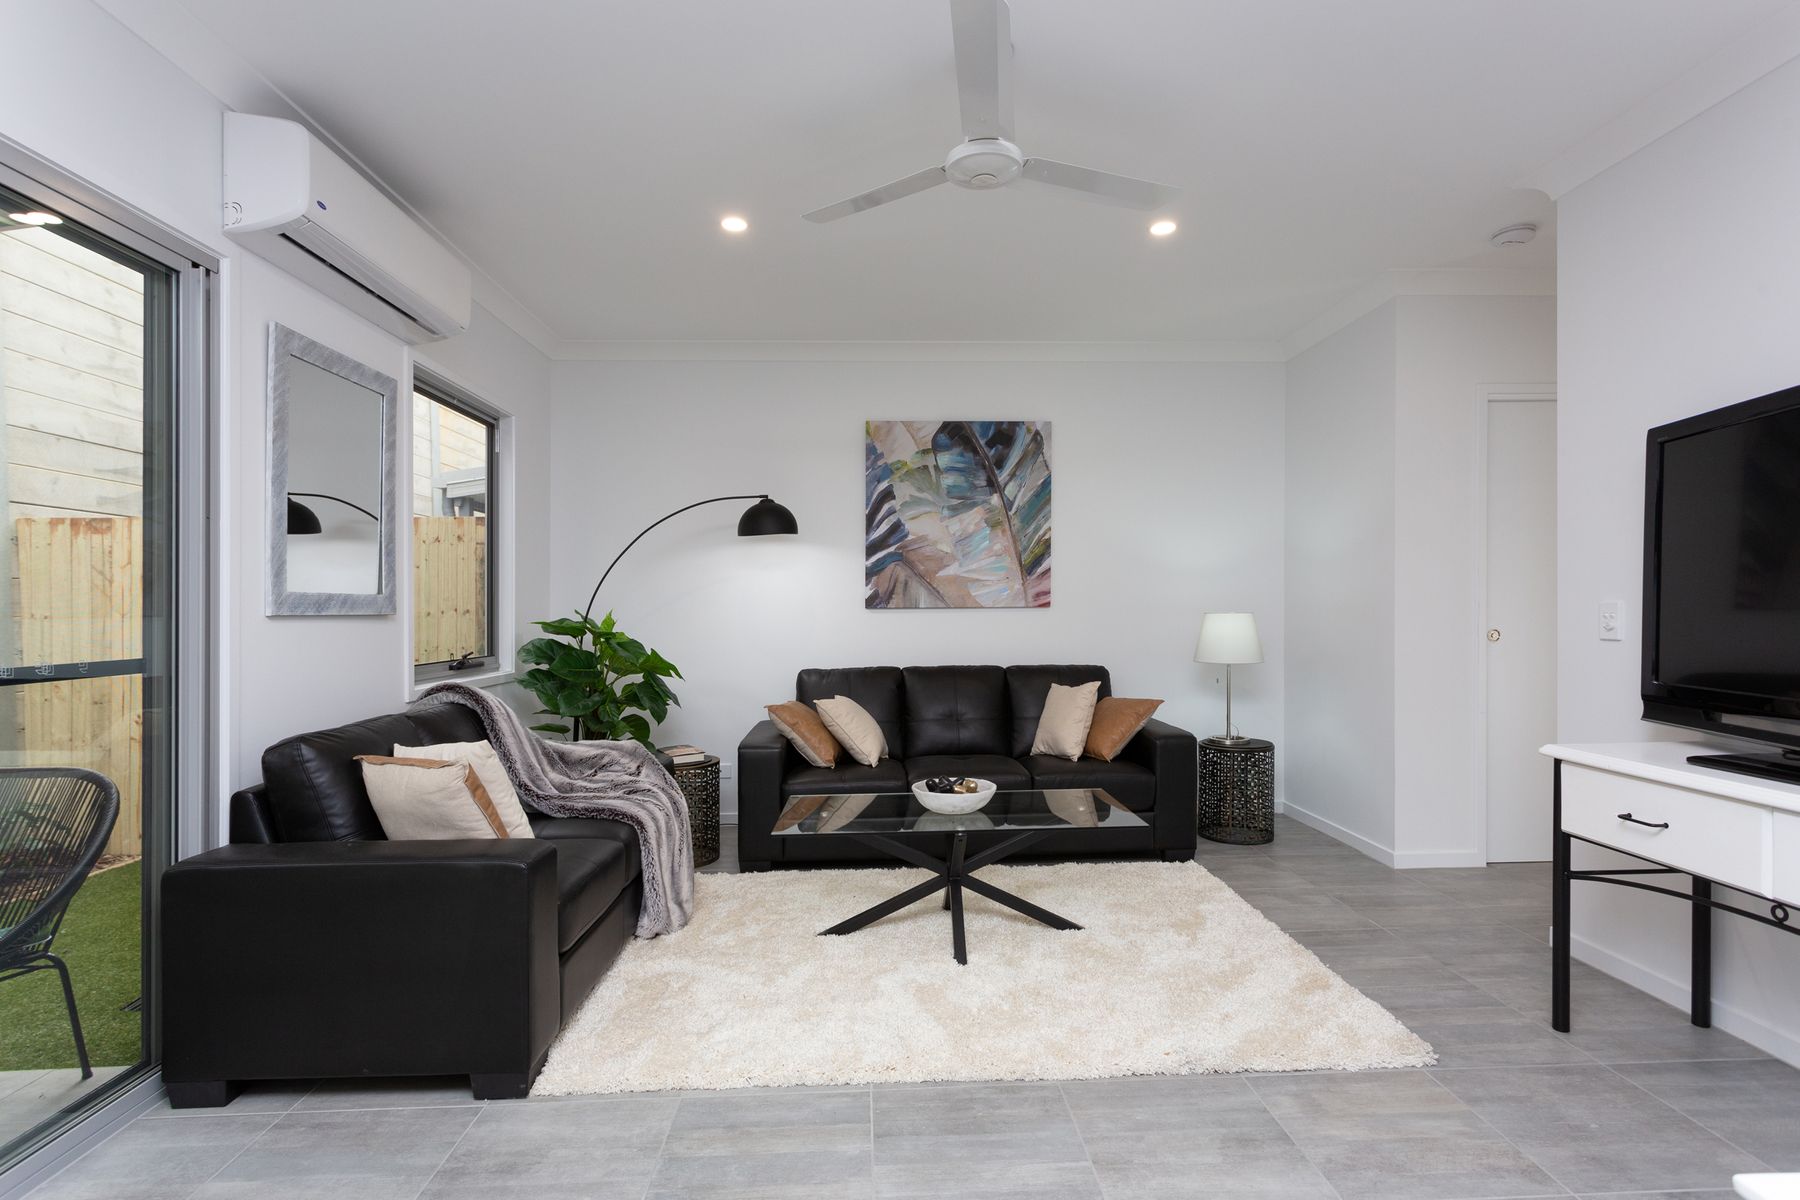 31 jotown drive coomera   Alessia Tang Area specialist 13